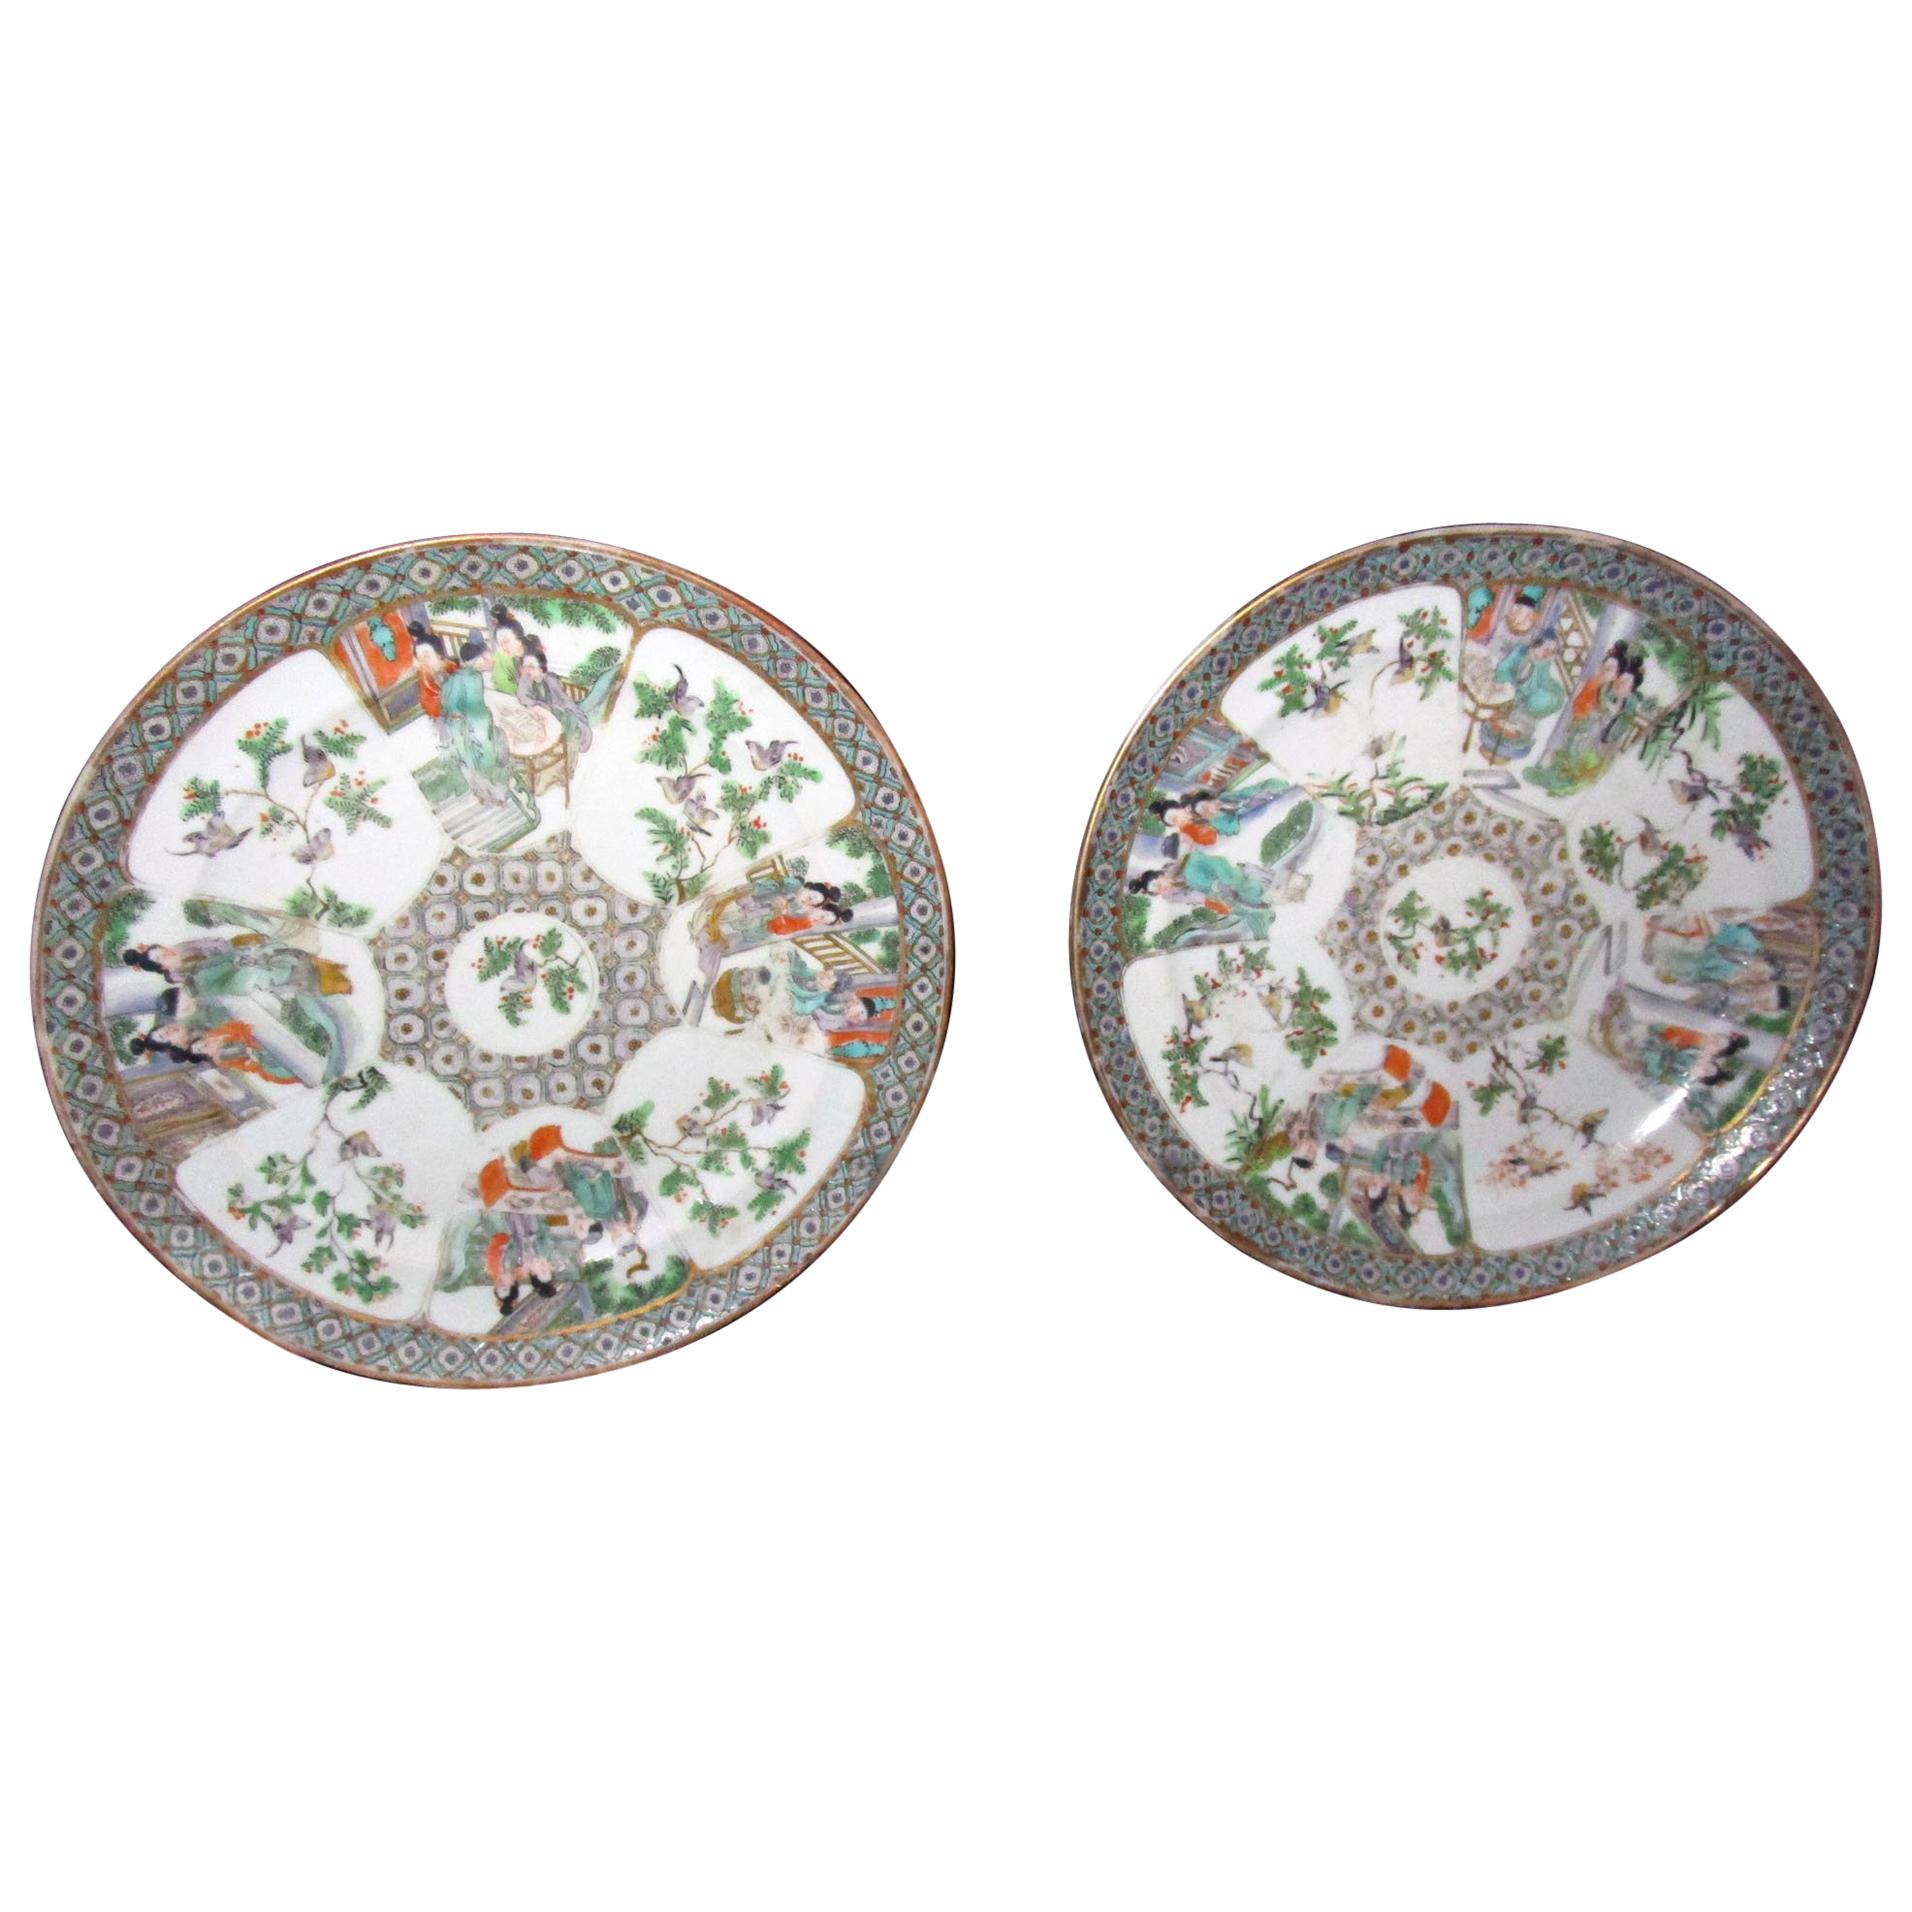 19th century Rose Medallion Chinese Export Plate Set of Two